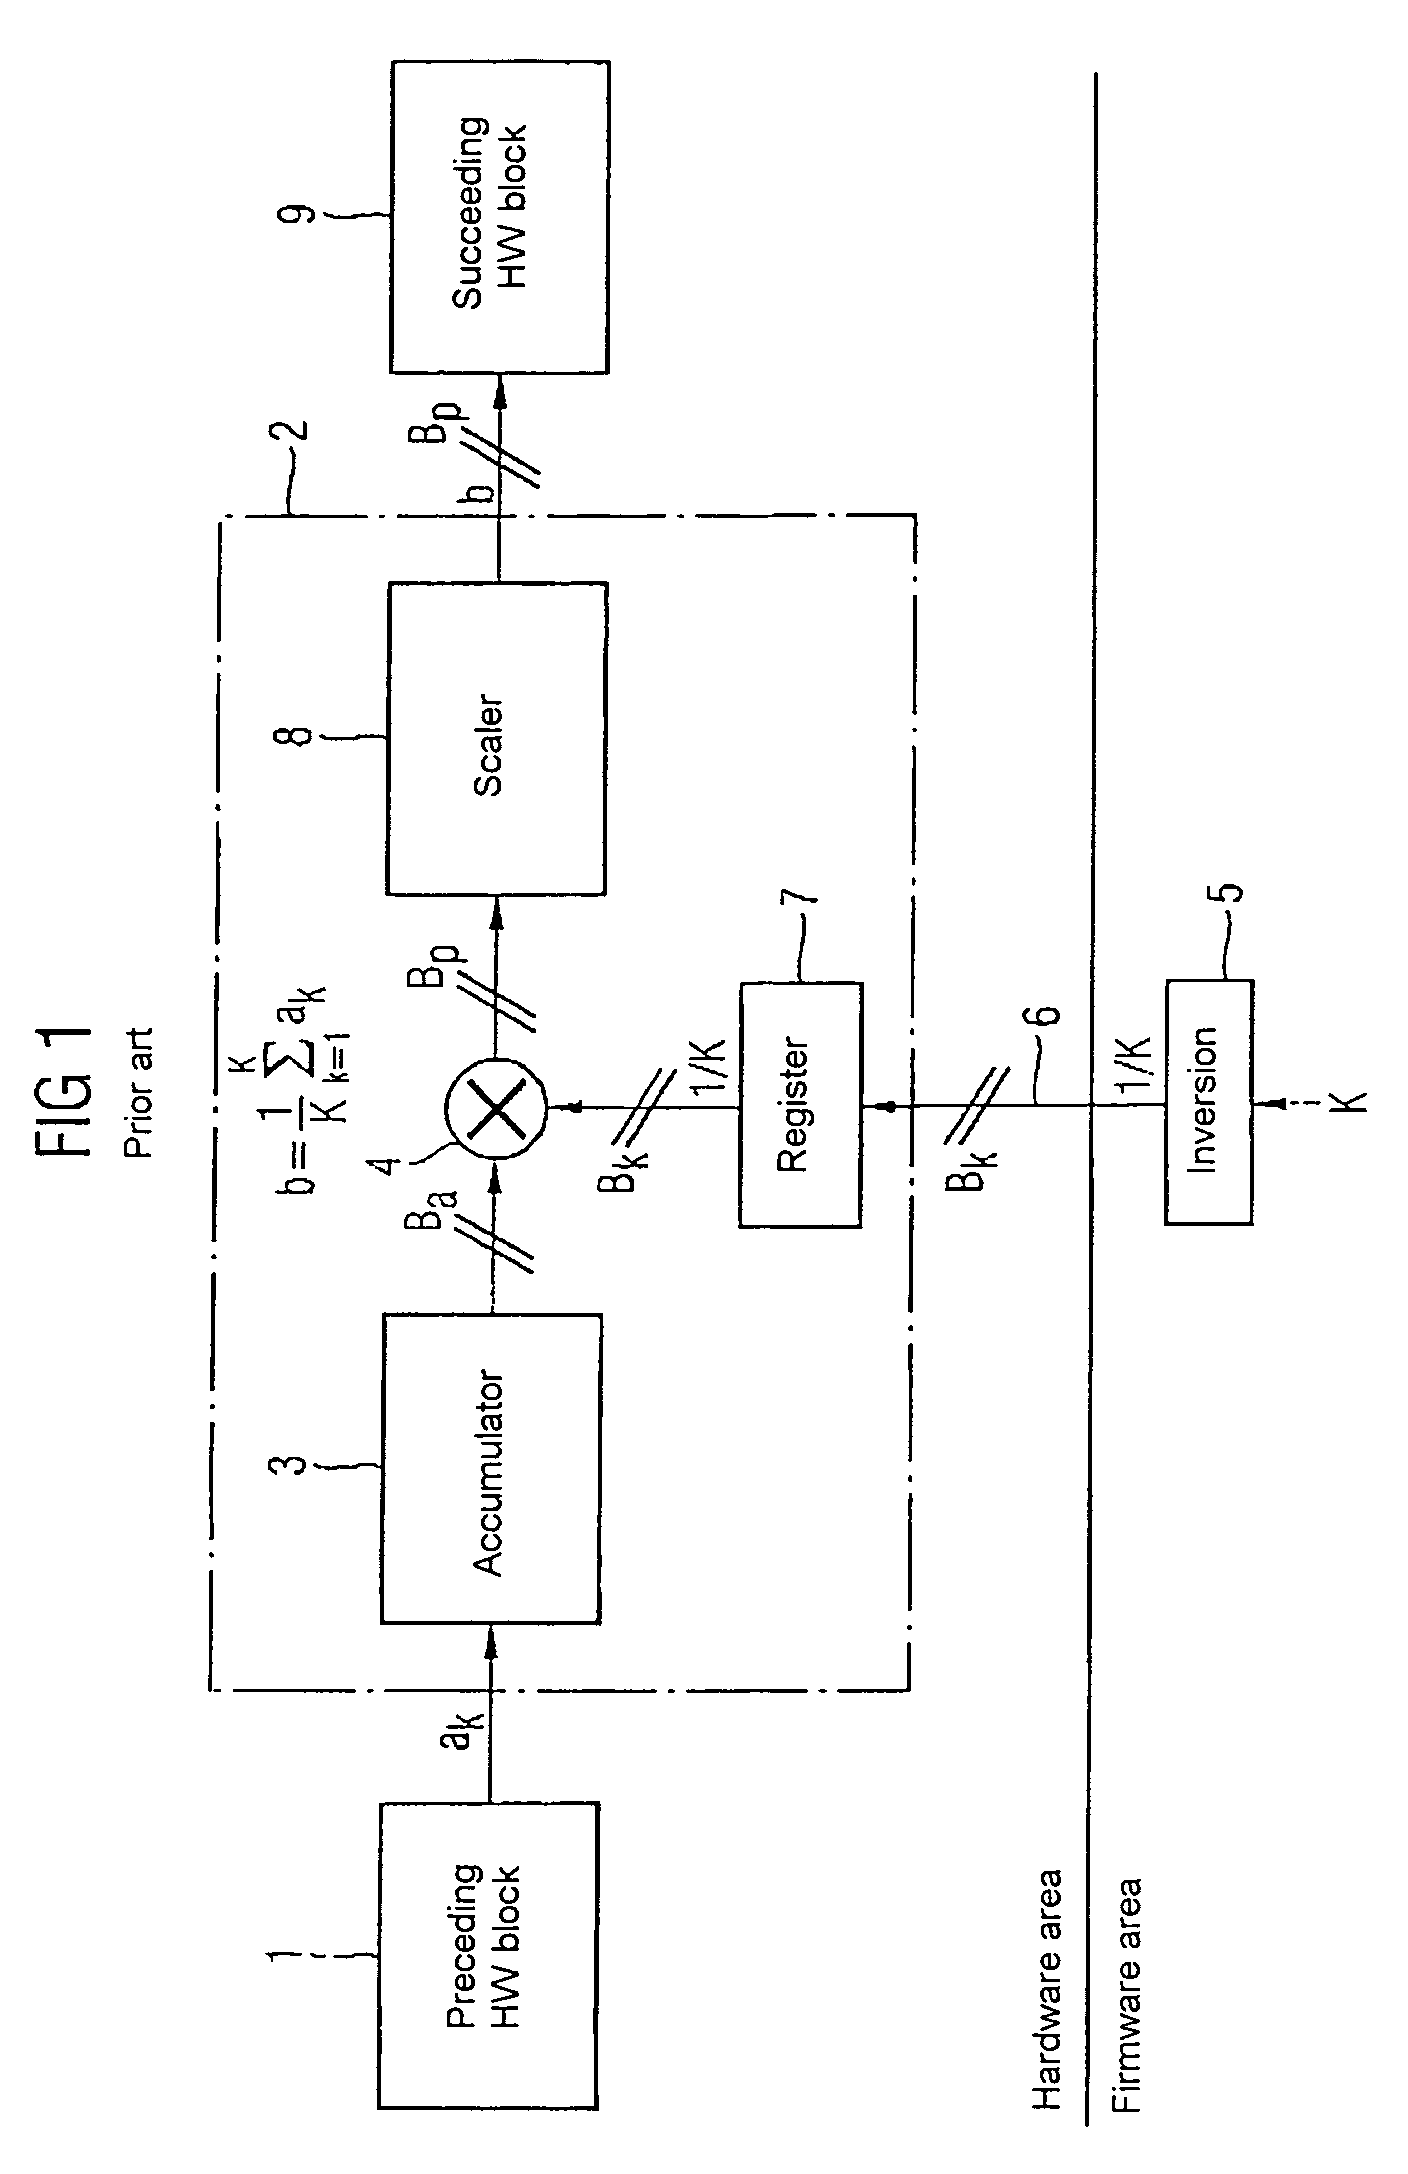 Method and apparatus for performing a multiplication or division operation in an electronic circuit